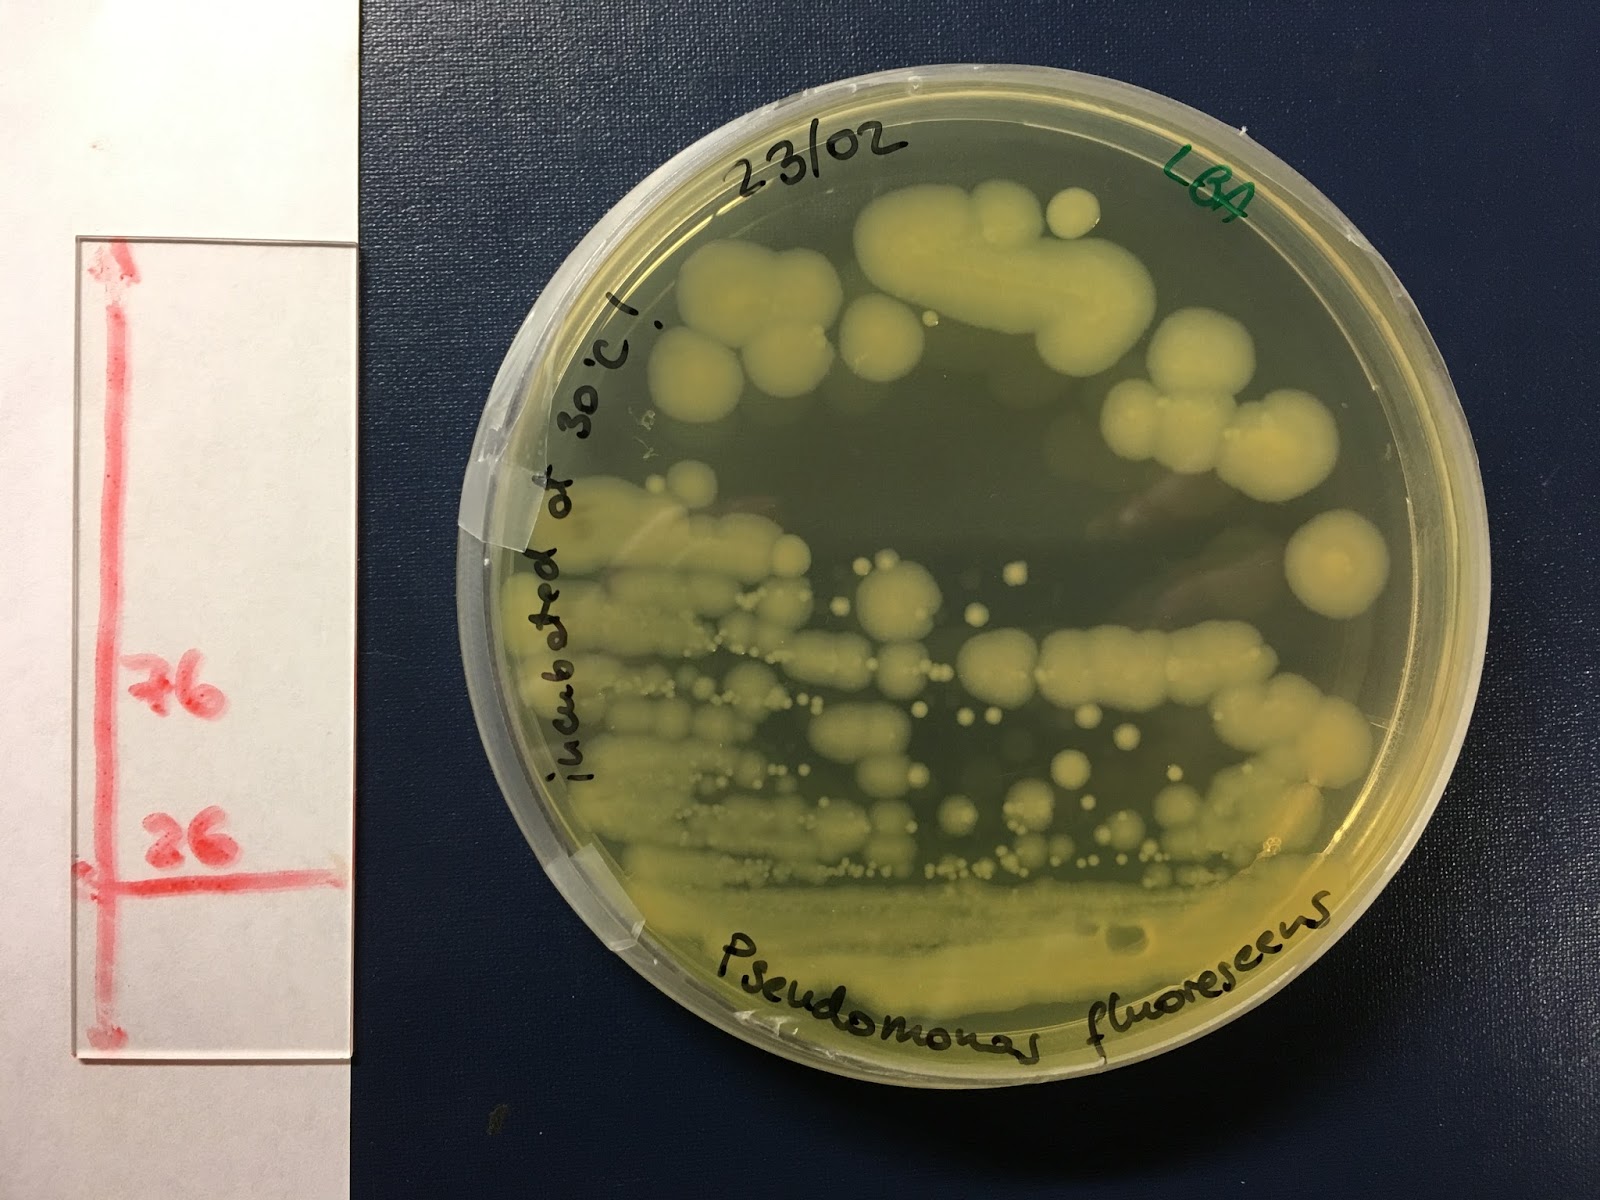 Learning Thru Research: Get to know Pseudomonas fluorescens